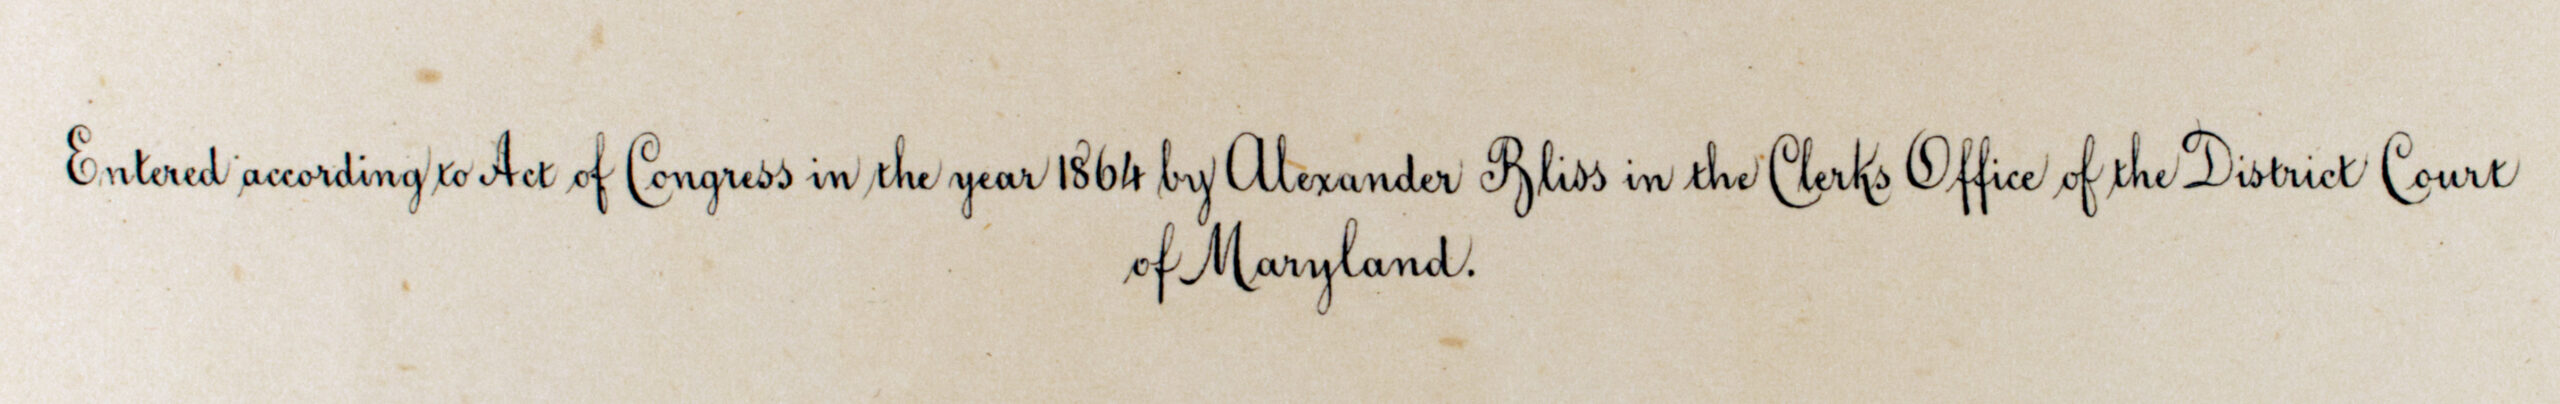 Kennedy, John Pendleton, and Alexander Bliss. Autograph Leaves of Our Country’s Authors. Baltimore: Cushings & Bailey, 1864. A.Hoen & Co. Lithographers, Baltimore. Entered according to an Act of Congress in the year 1864 by Alexander Bliss.